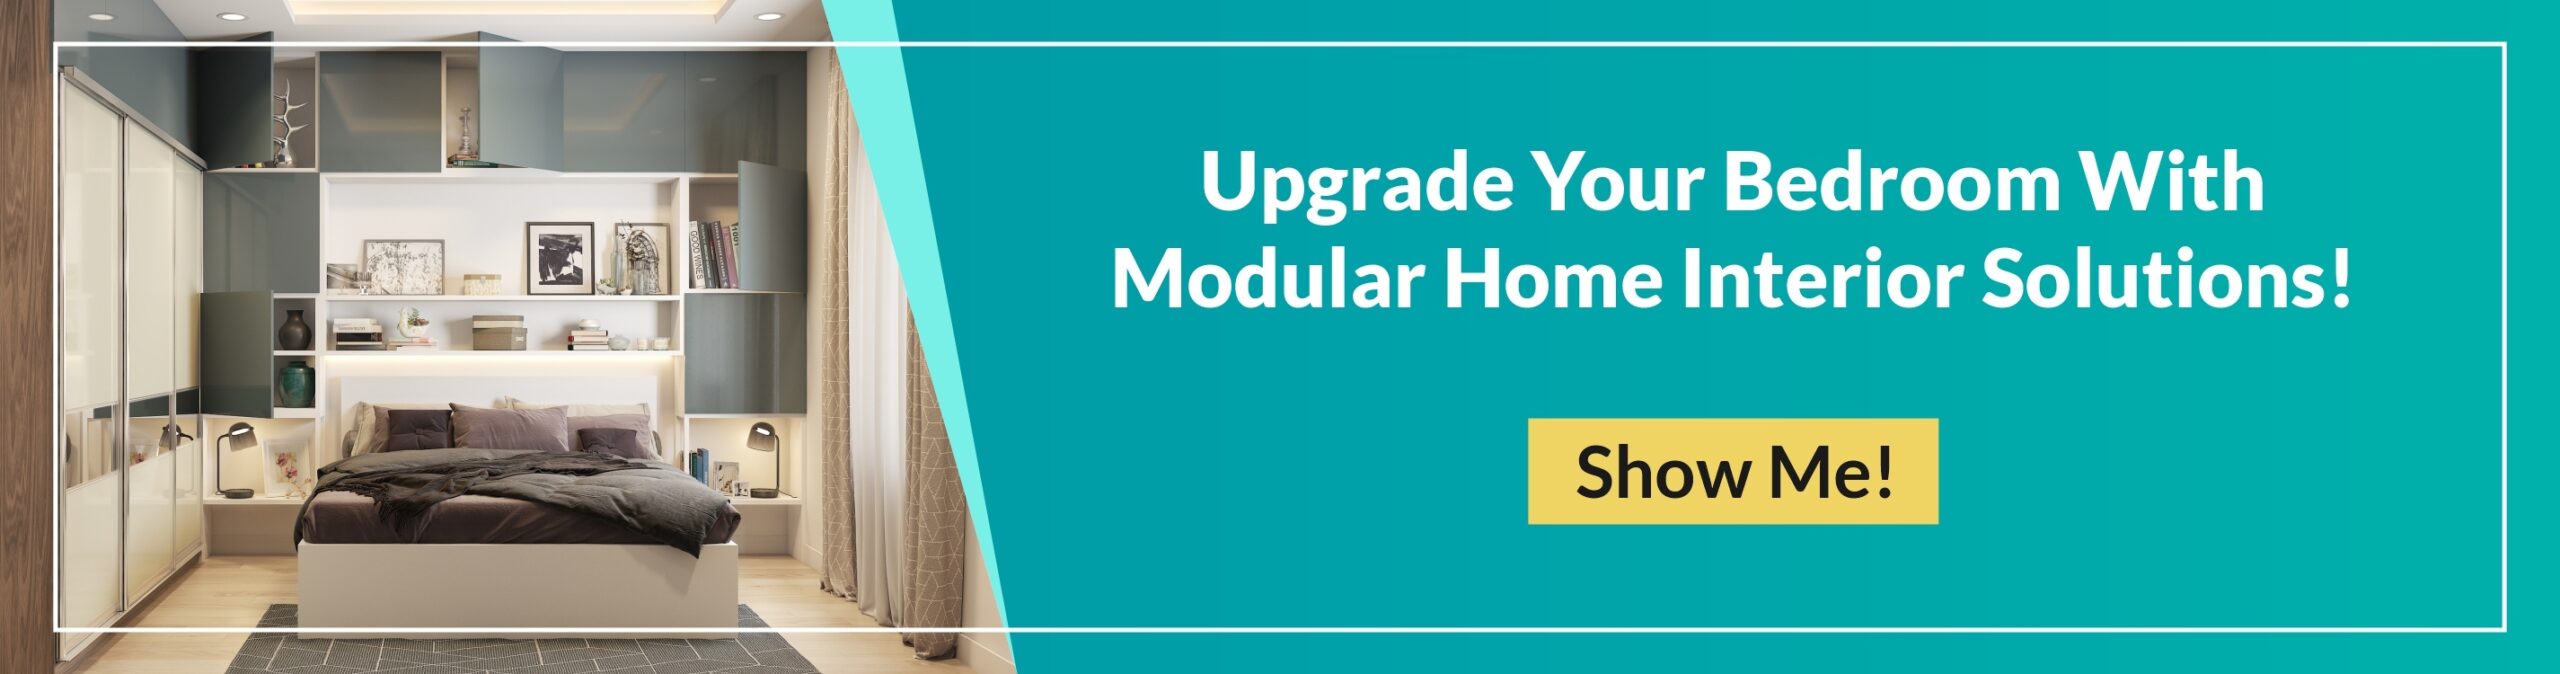 Upgrade your bedroom with modular home interior solutions!